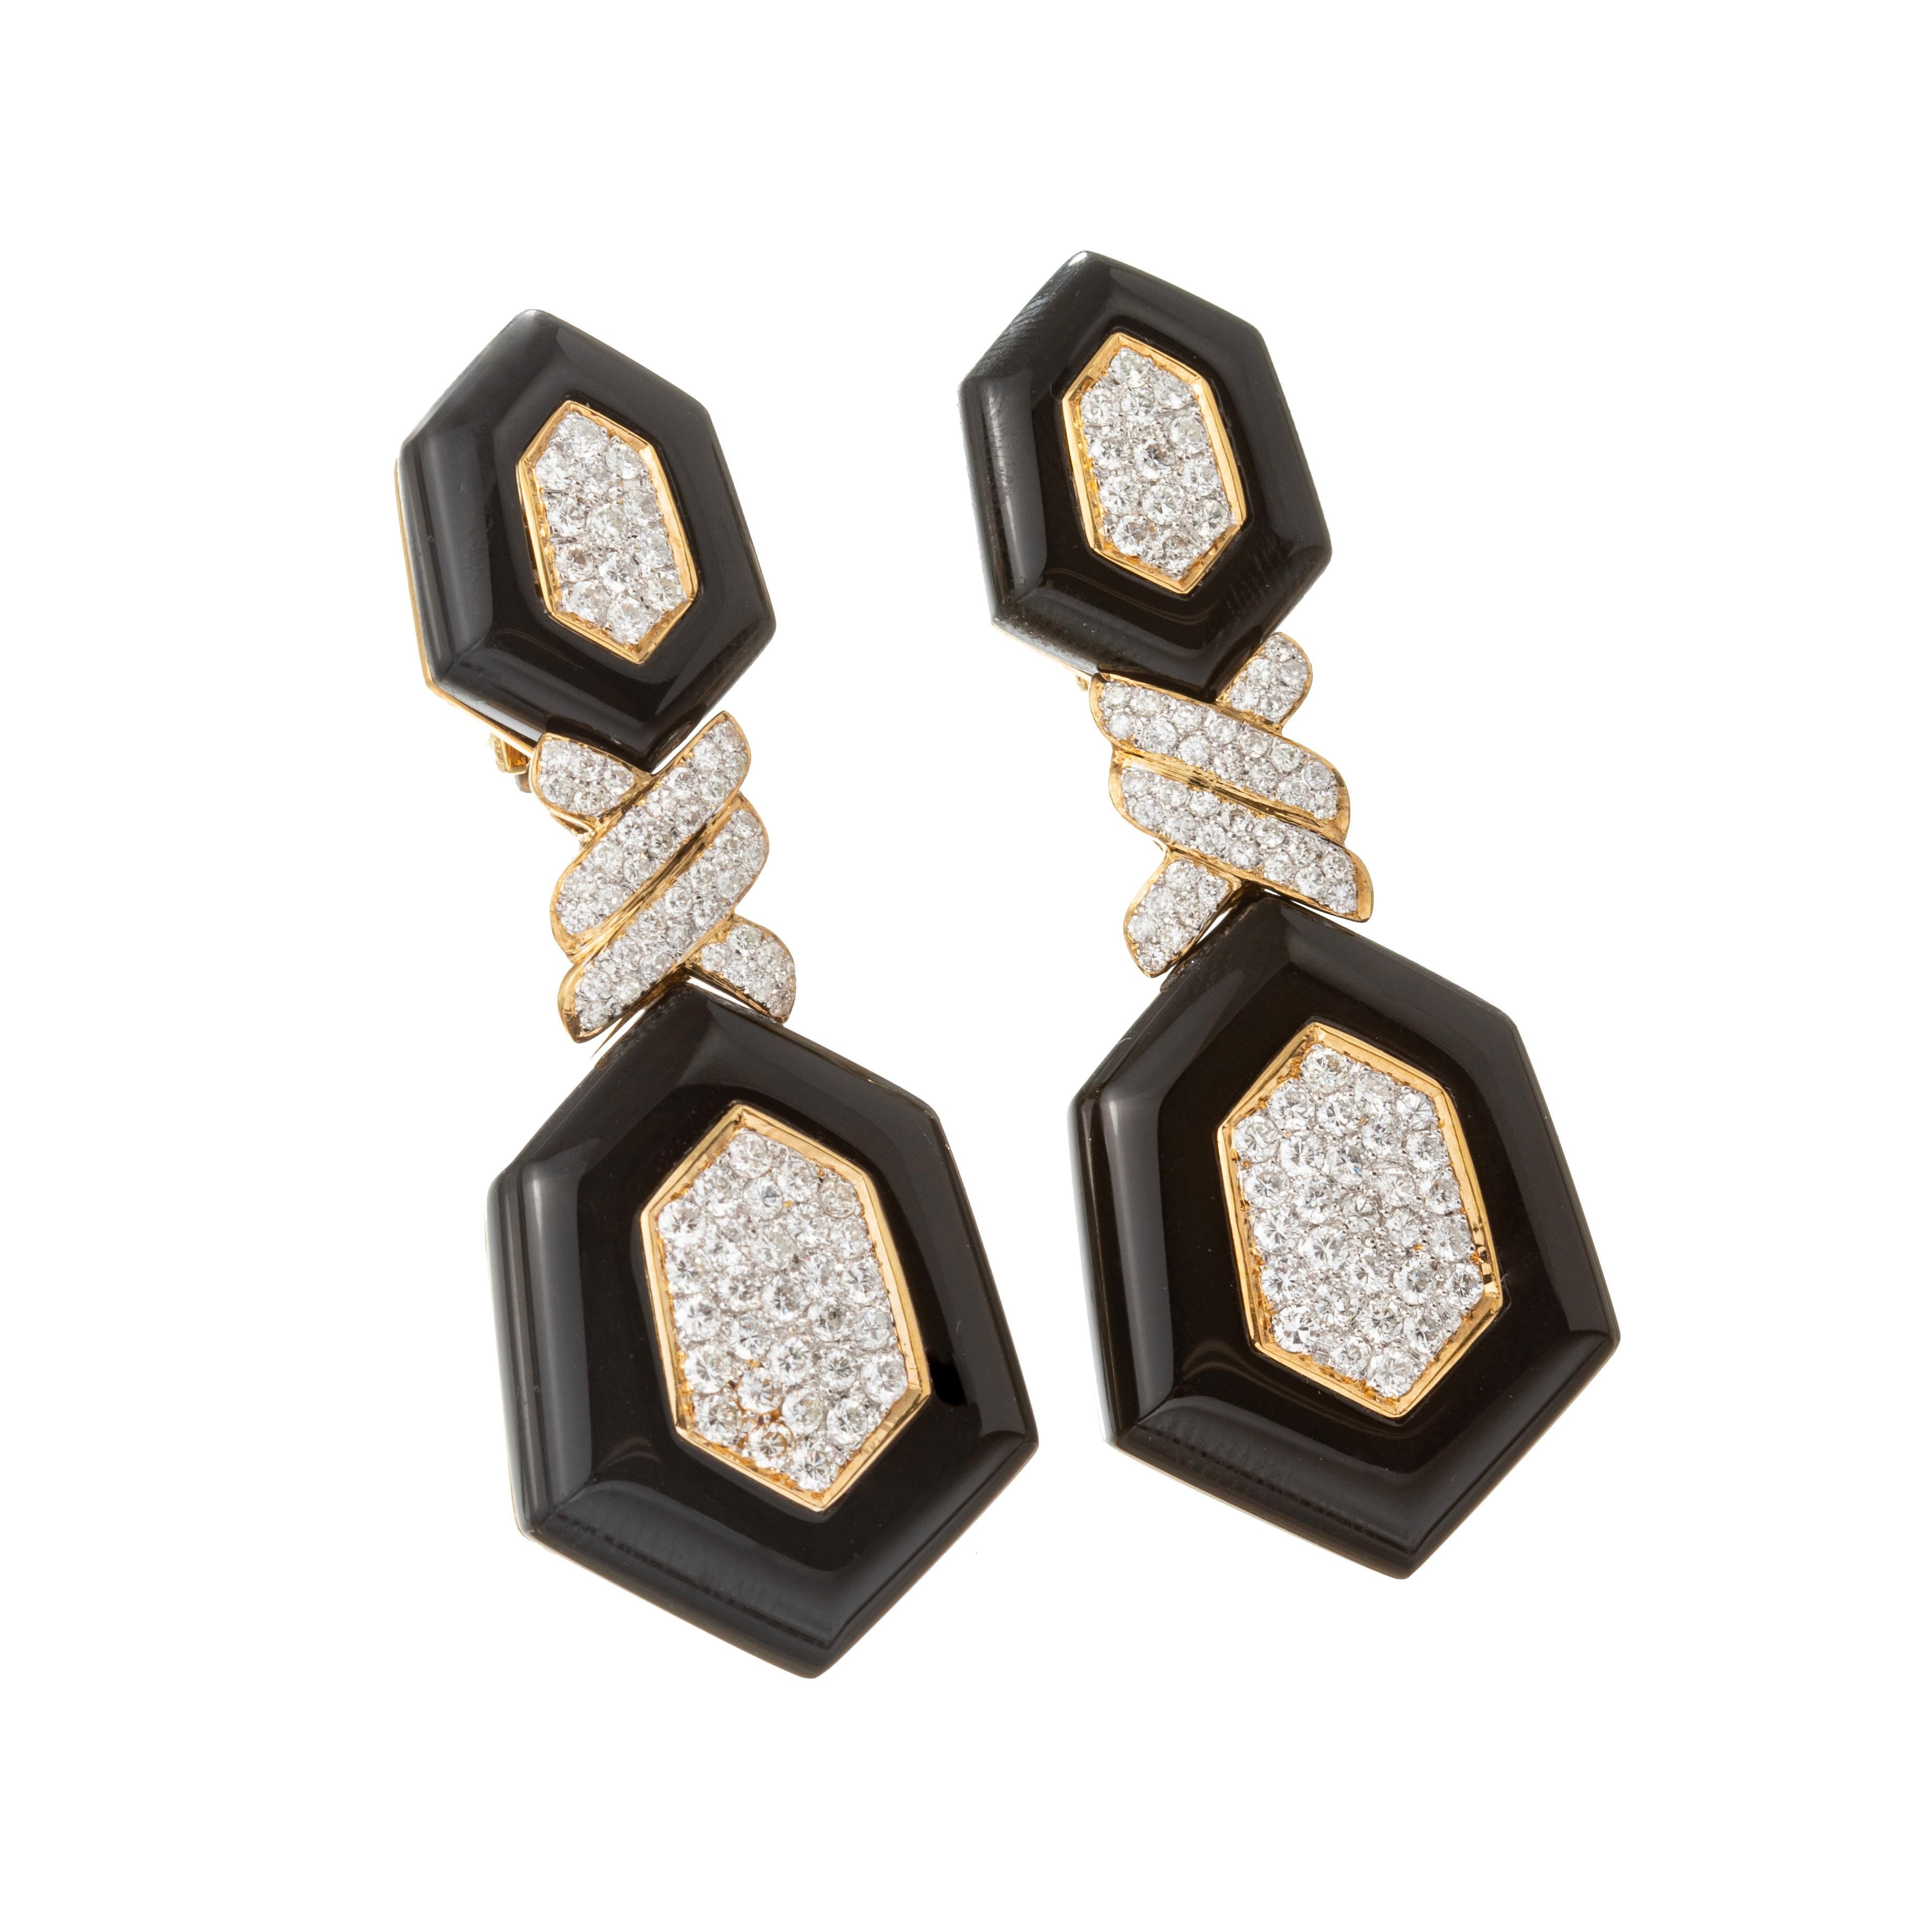 1970s statement drop earrings in 18k yellow gold, built in the Art Deco revival style featuring classic geometric patterns adorned in carved black onyx and pave-set colorless diamonds.

168 round brilliant-cut diamonds weighing approximately 5.04